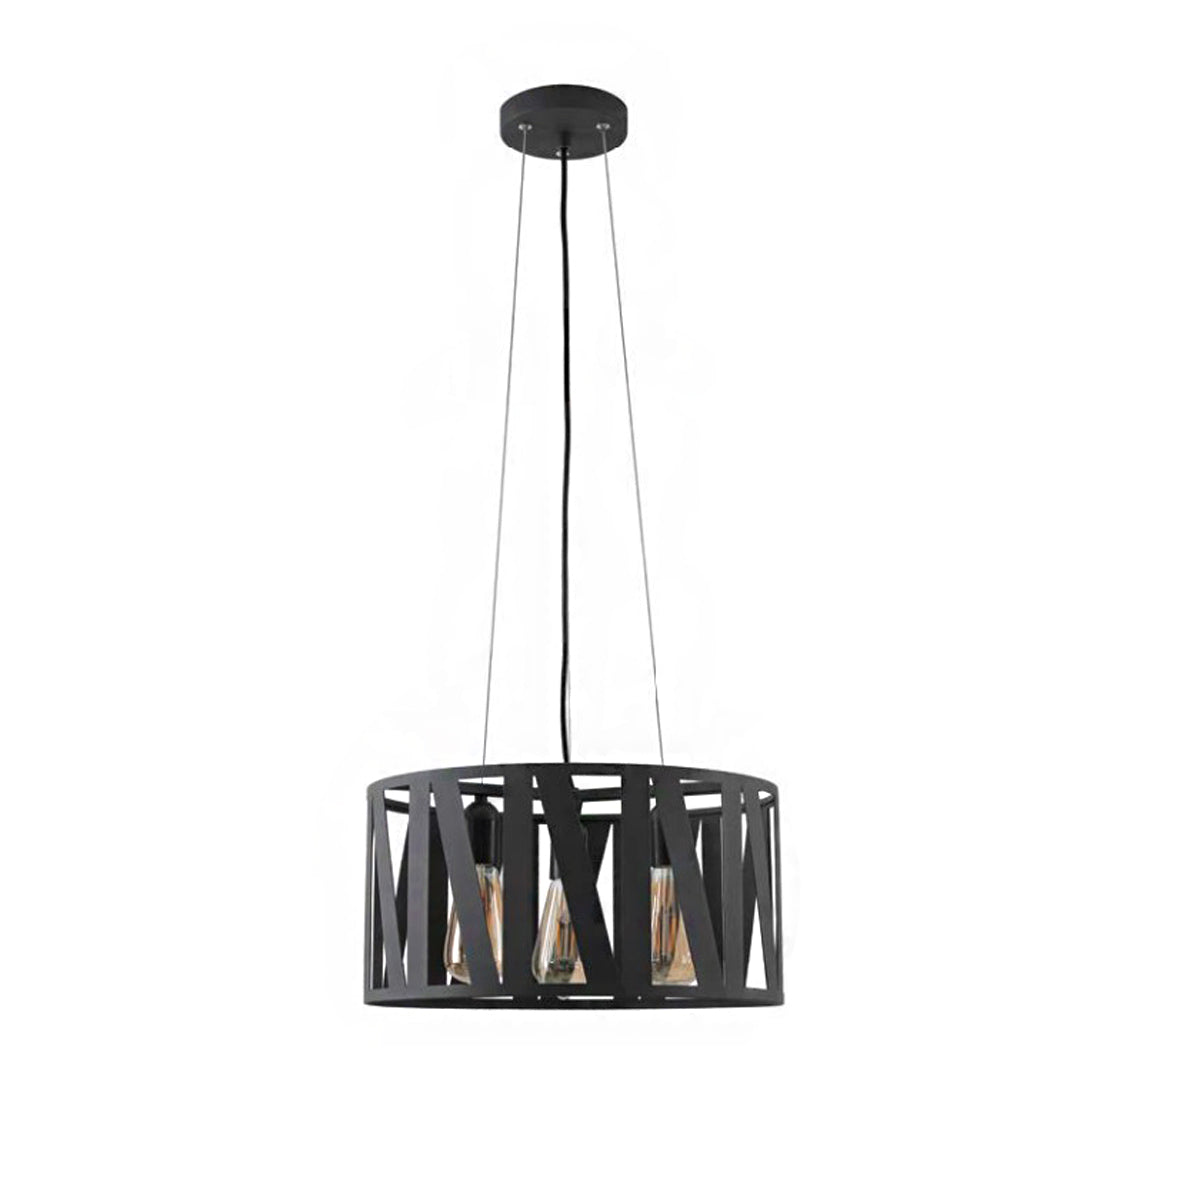 Nikita is a very aesthetic light source for any room lighting. The dark metal struts still let a lot of light through, but at the same time also provide a special effect in the lighting and an impressive play of light and shadow with a very cozy effect